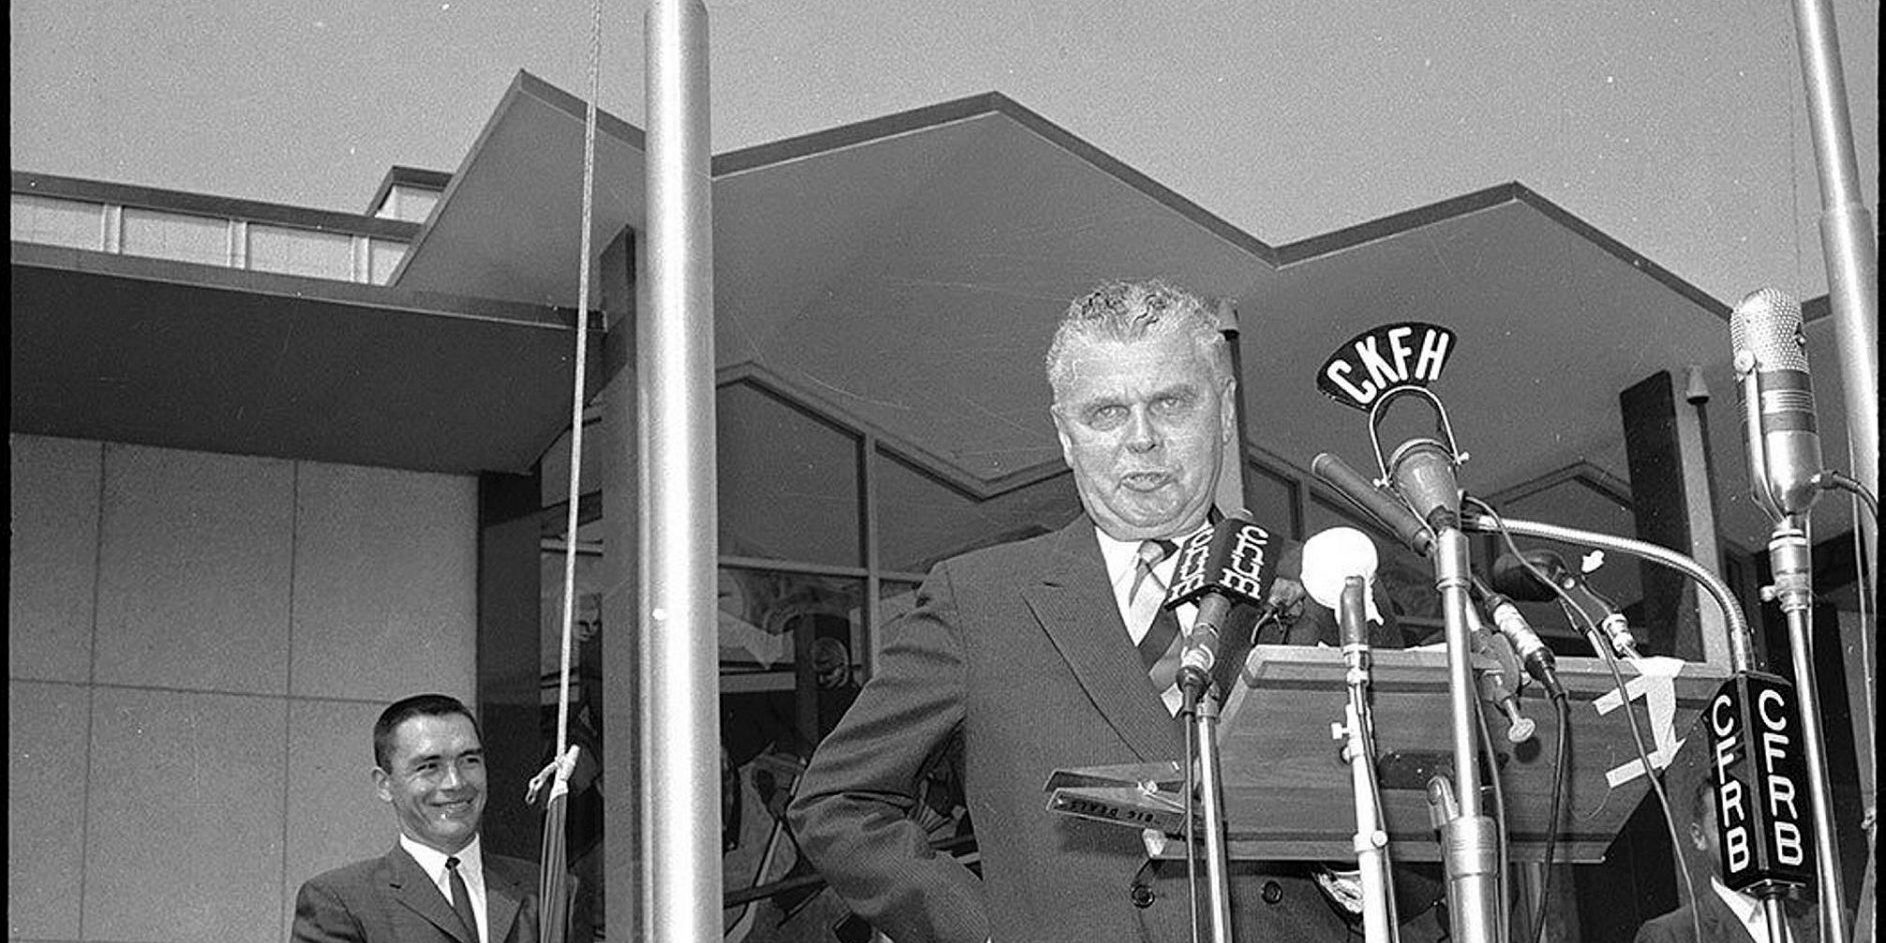 John_Diefenbaker_at_opening_of_Hockey_Hall_of_Fame_(50540776037).t63f659d5.m2048.x_xiQzLPZ